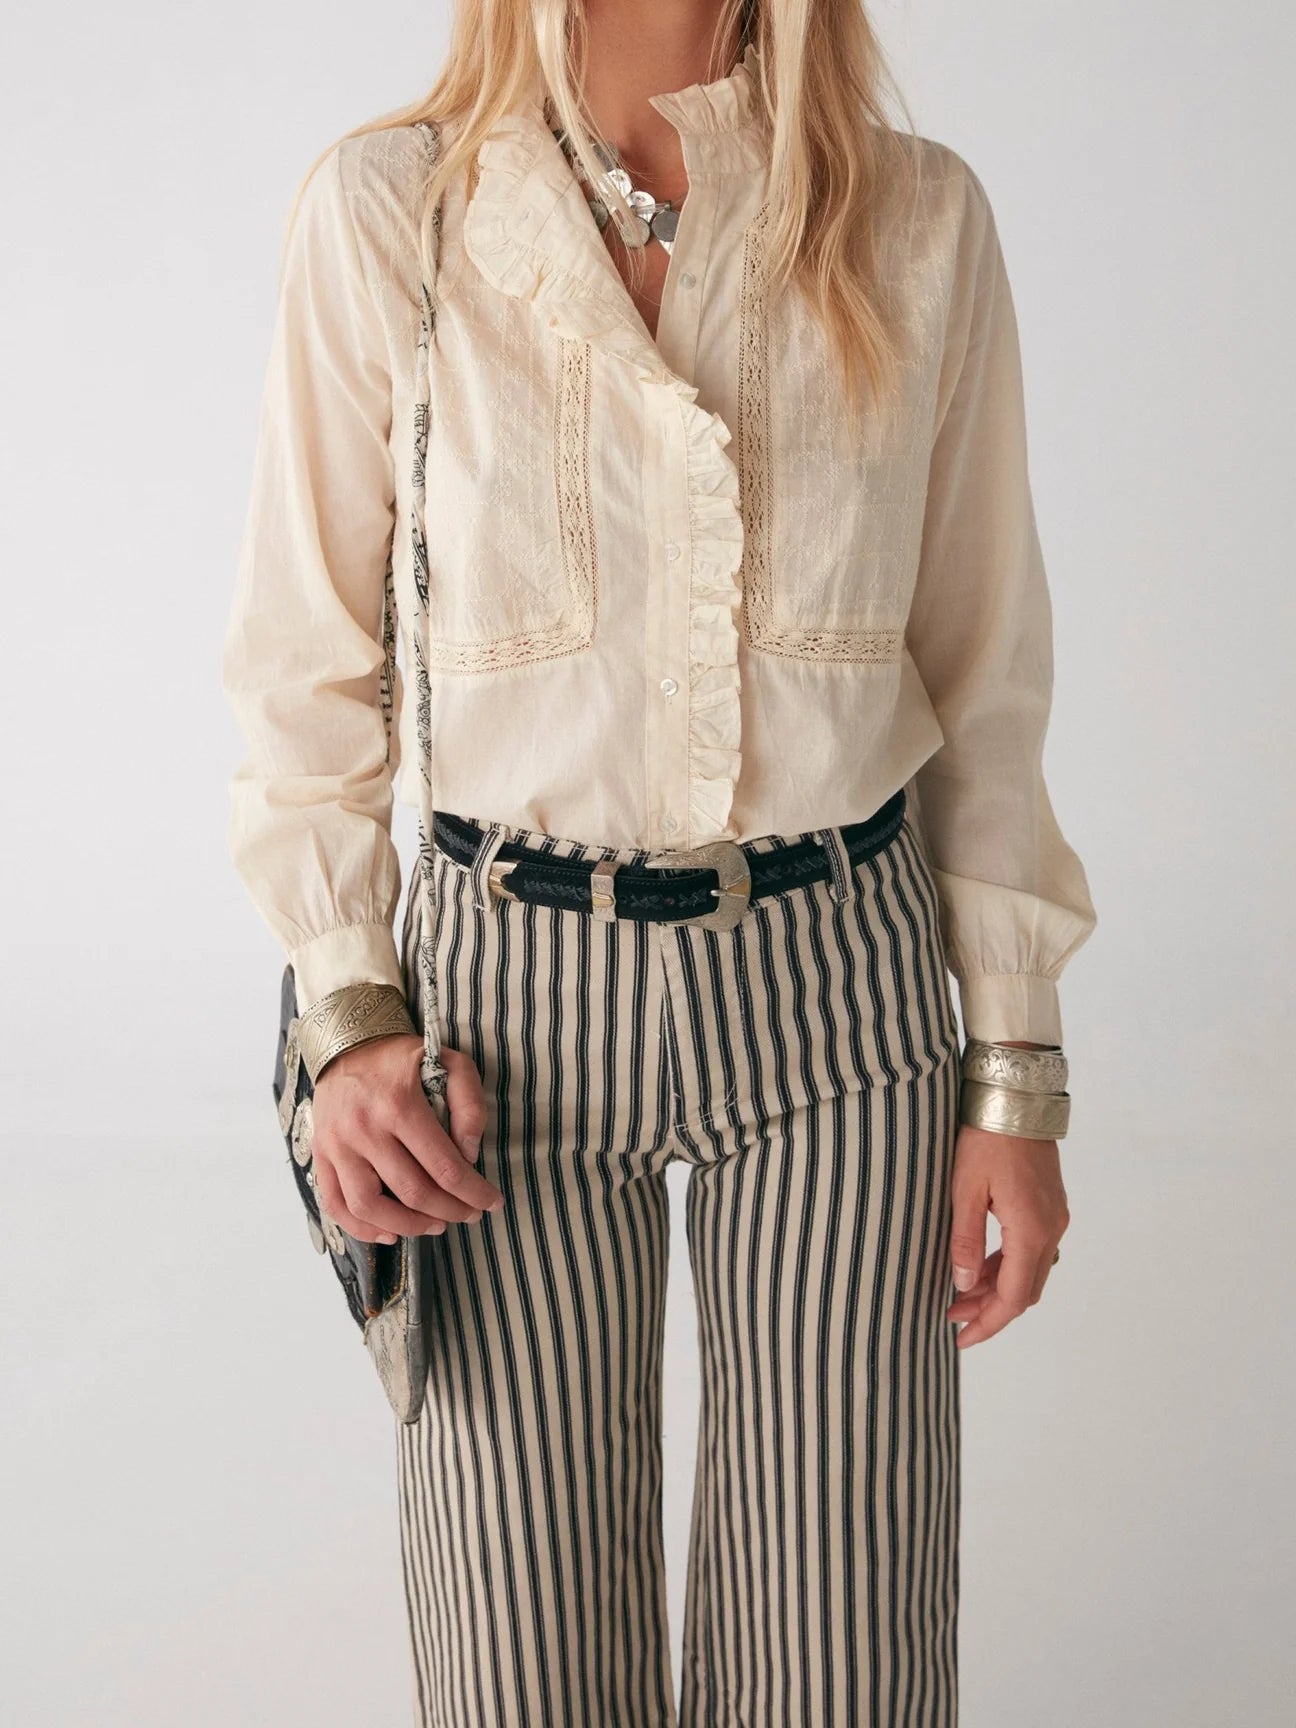 A woman wearing the Maison Hotel Riya Blouse - Victorian Ivory with embroidery, paired with striped pants.